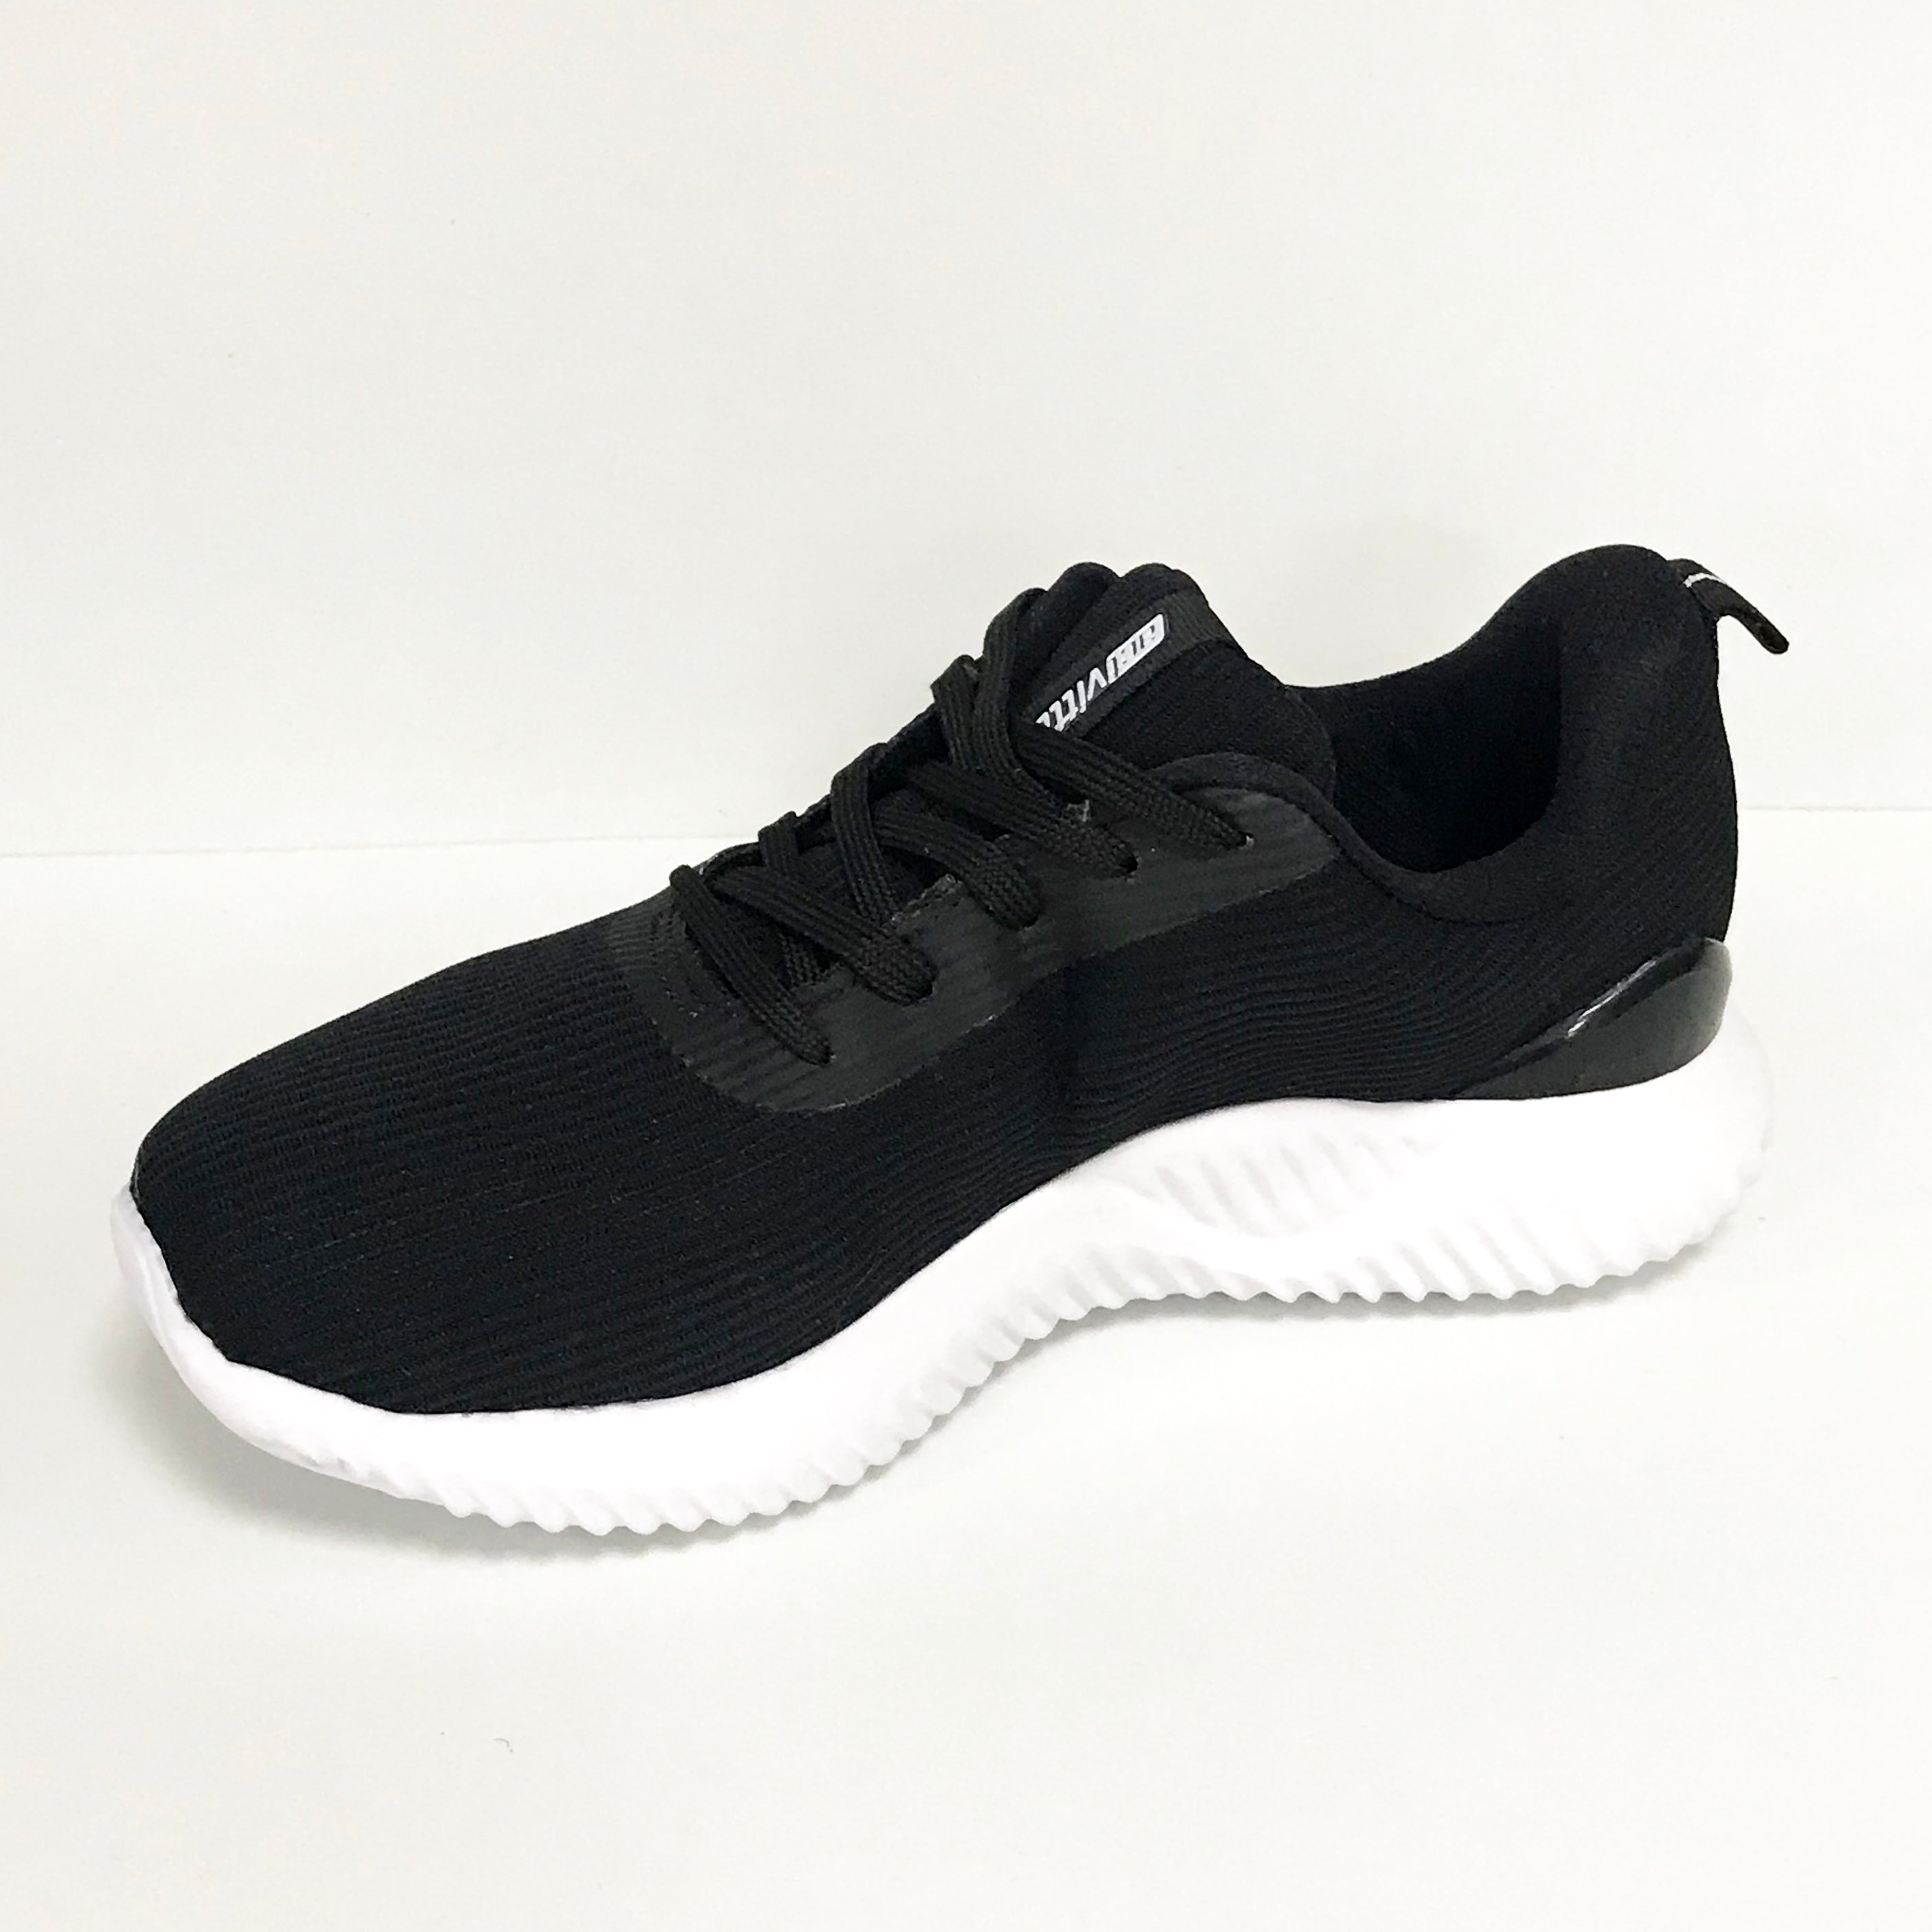 Actvitta 4802-103 Lace Up Sneaker in Black